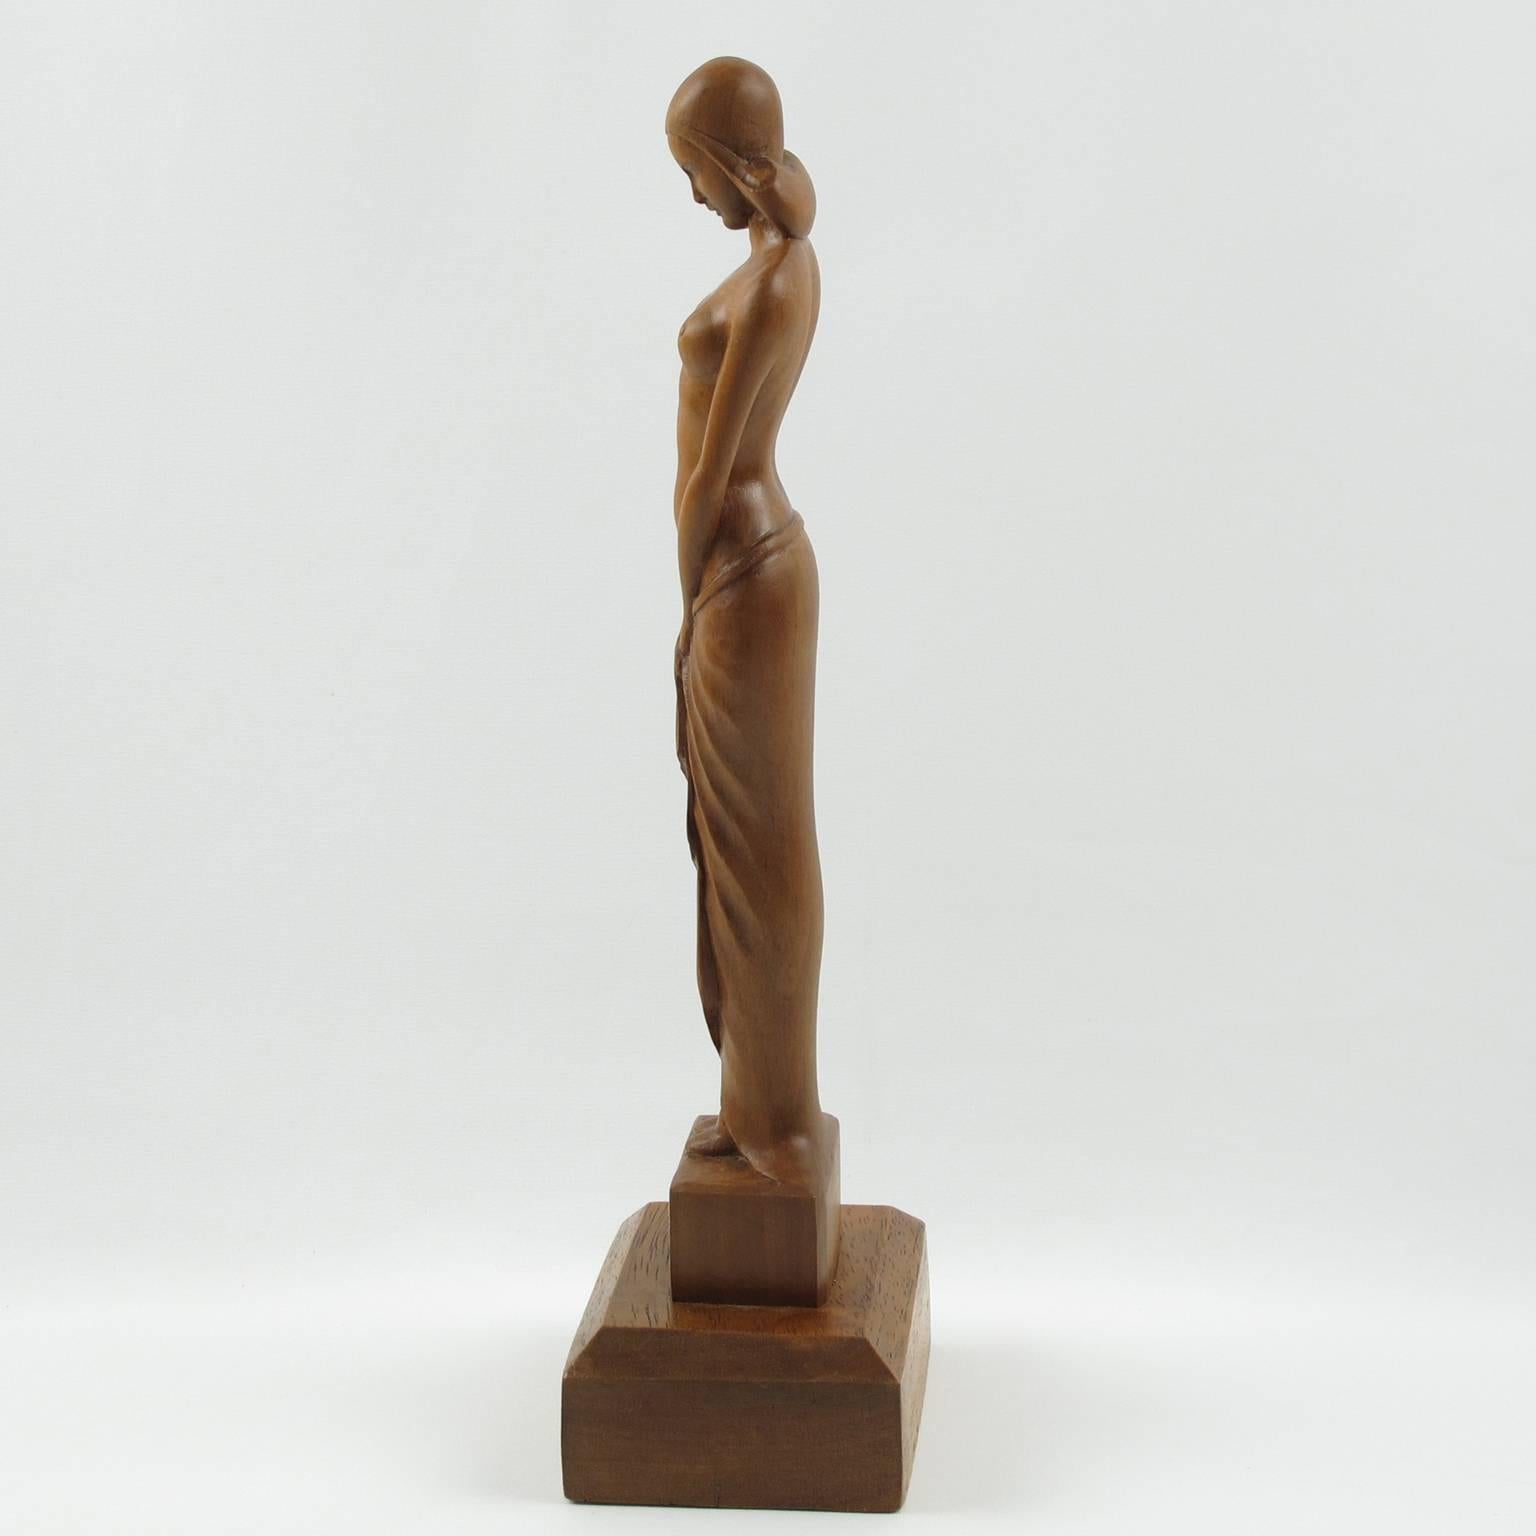 Rare elegant vintage wooden sculpture, statuette by French sculptor L. Goussot. Finely carved bare maiden in a typical Art Deco period design. The figurine is made of beechwood with rich golden brown patina, base in mahogany. Signed on base of